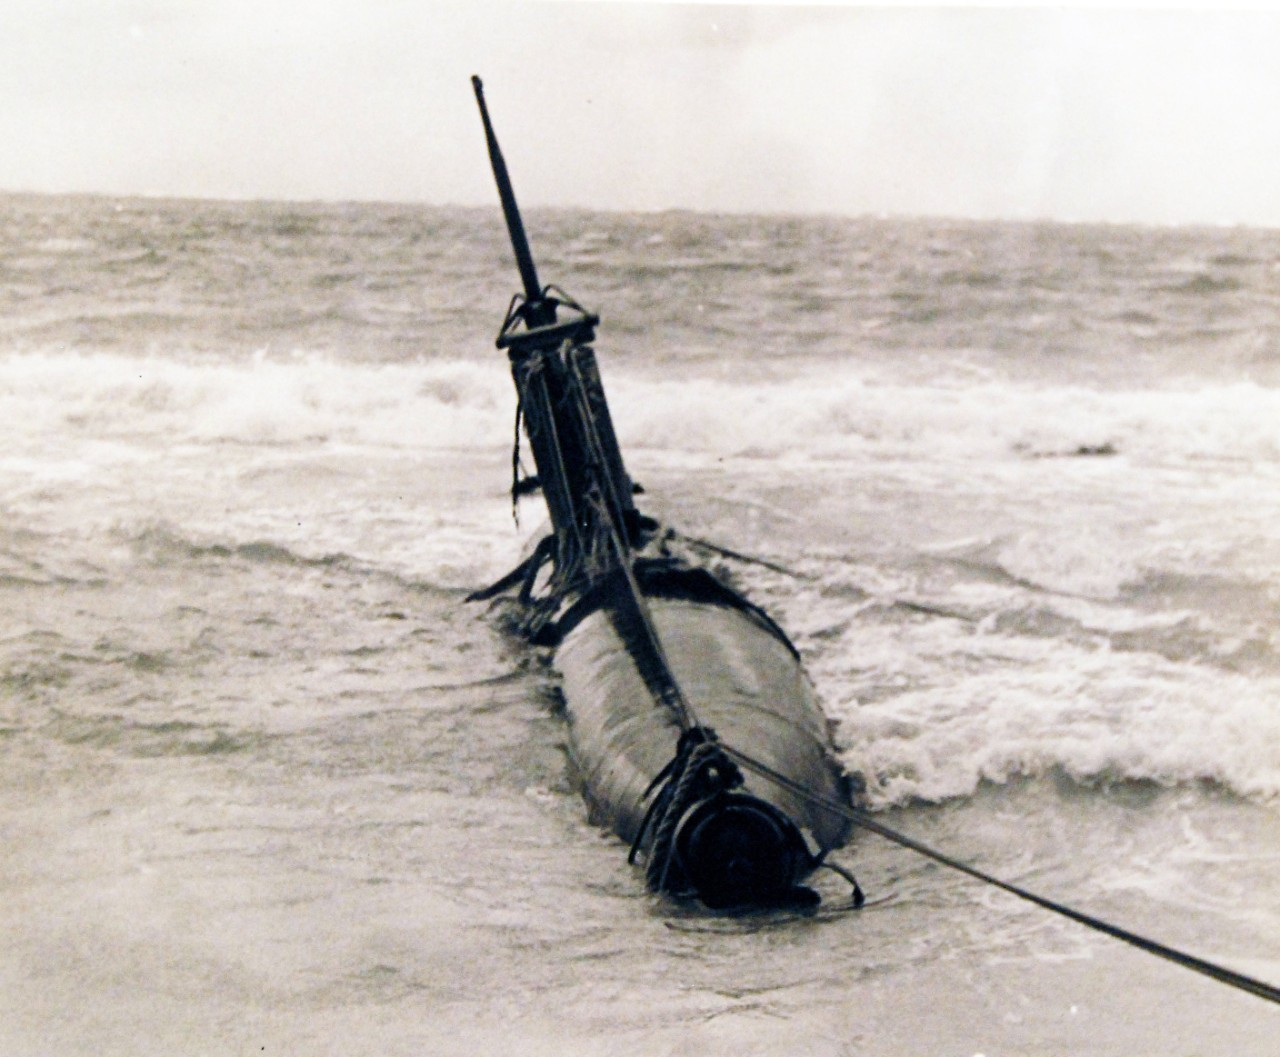 80-G-32683:   Pearl Harbor Attack, December 7, 1941.    HA-19.  (Japanese "Type A" midget submarine).  Beached in eastern Oahu, after it unsuccessfully attempted to enter Pearl Harbor during the attack.  The photograph was taken on or shortly after 8 December 1941.   Official U.S. Navy photograph, now in the collections of the National Archives. (7/2/2014).